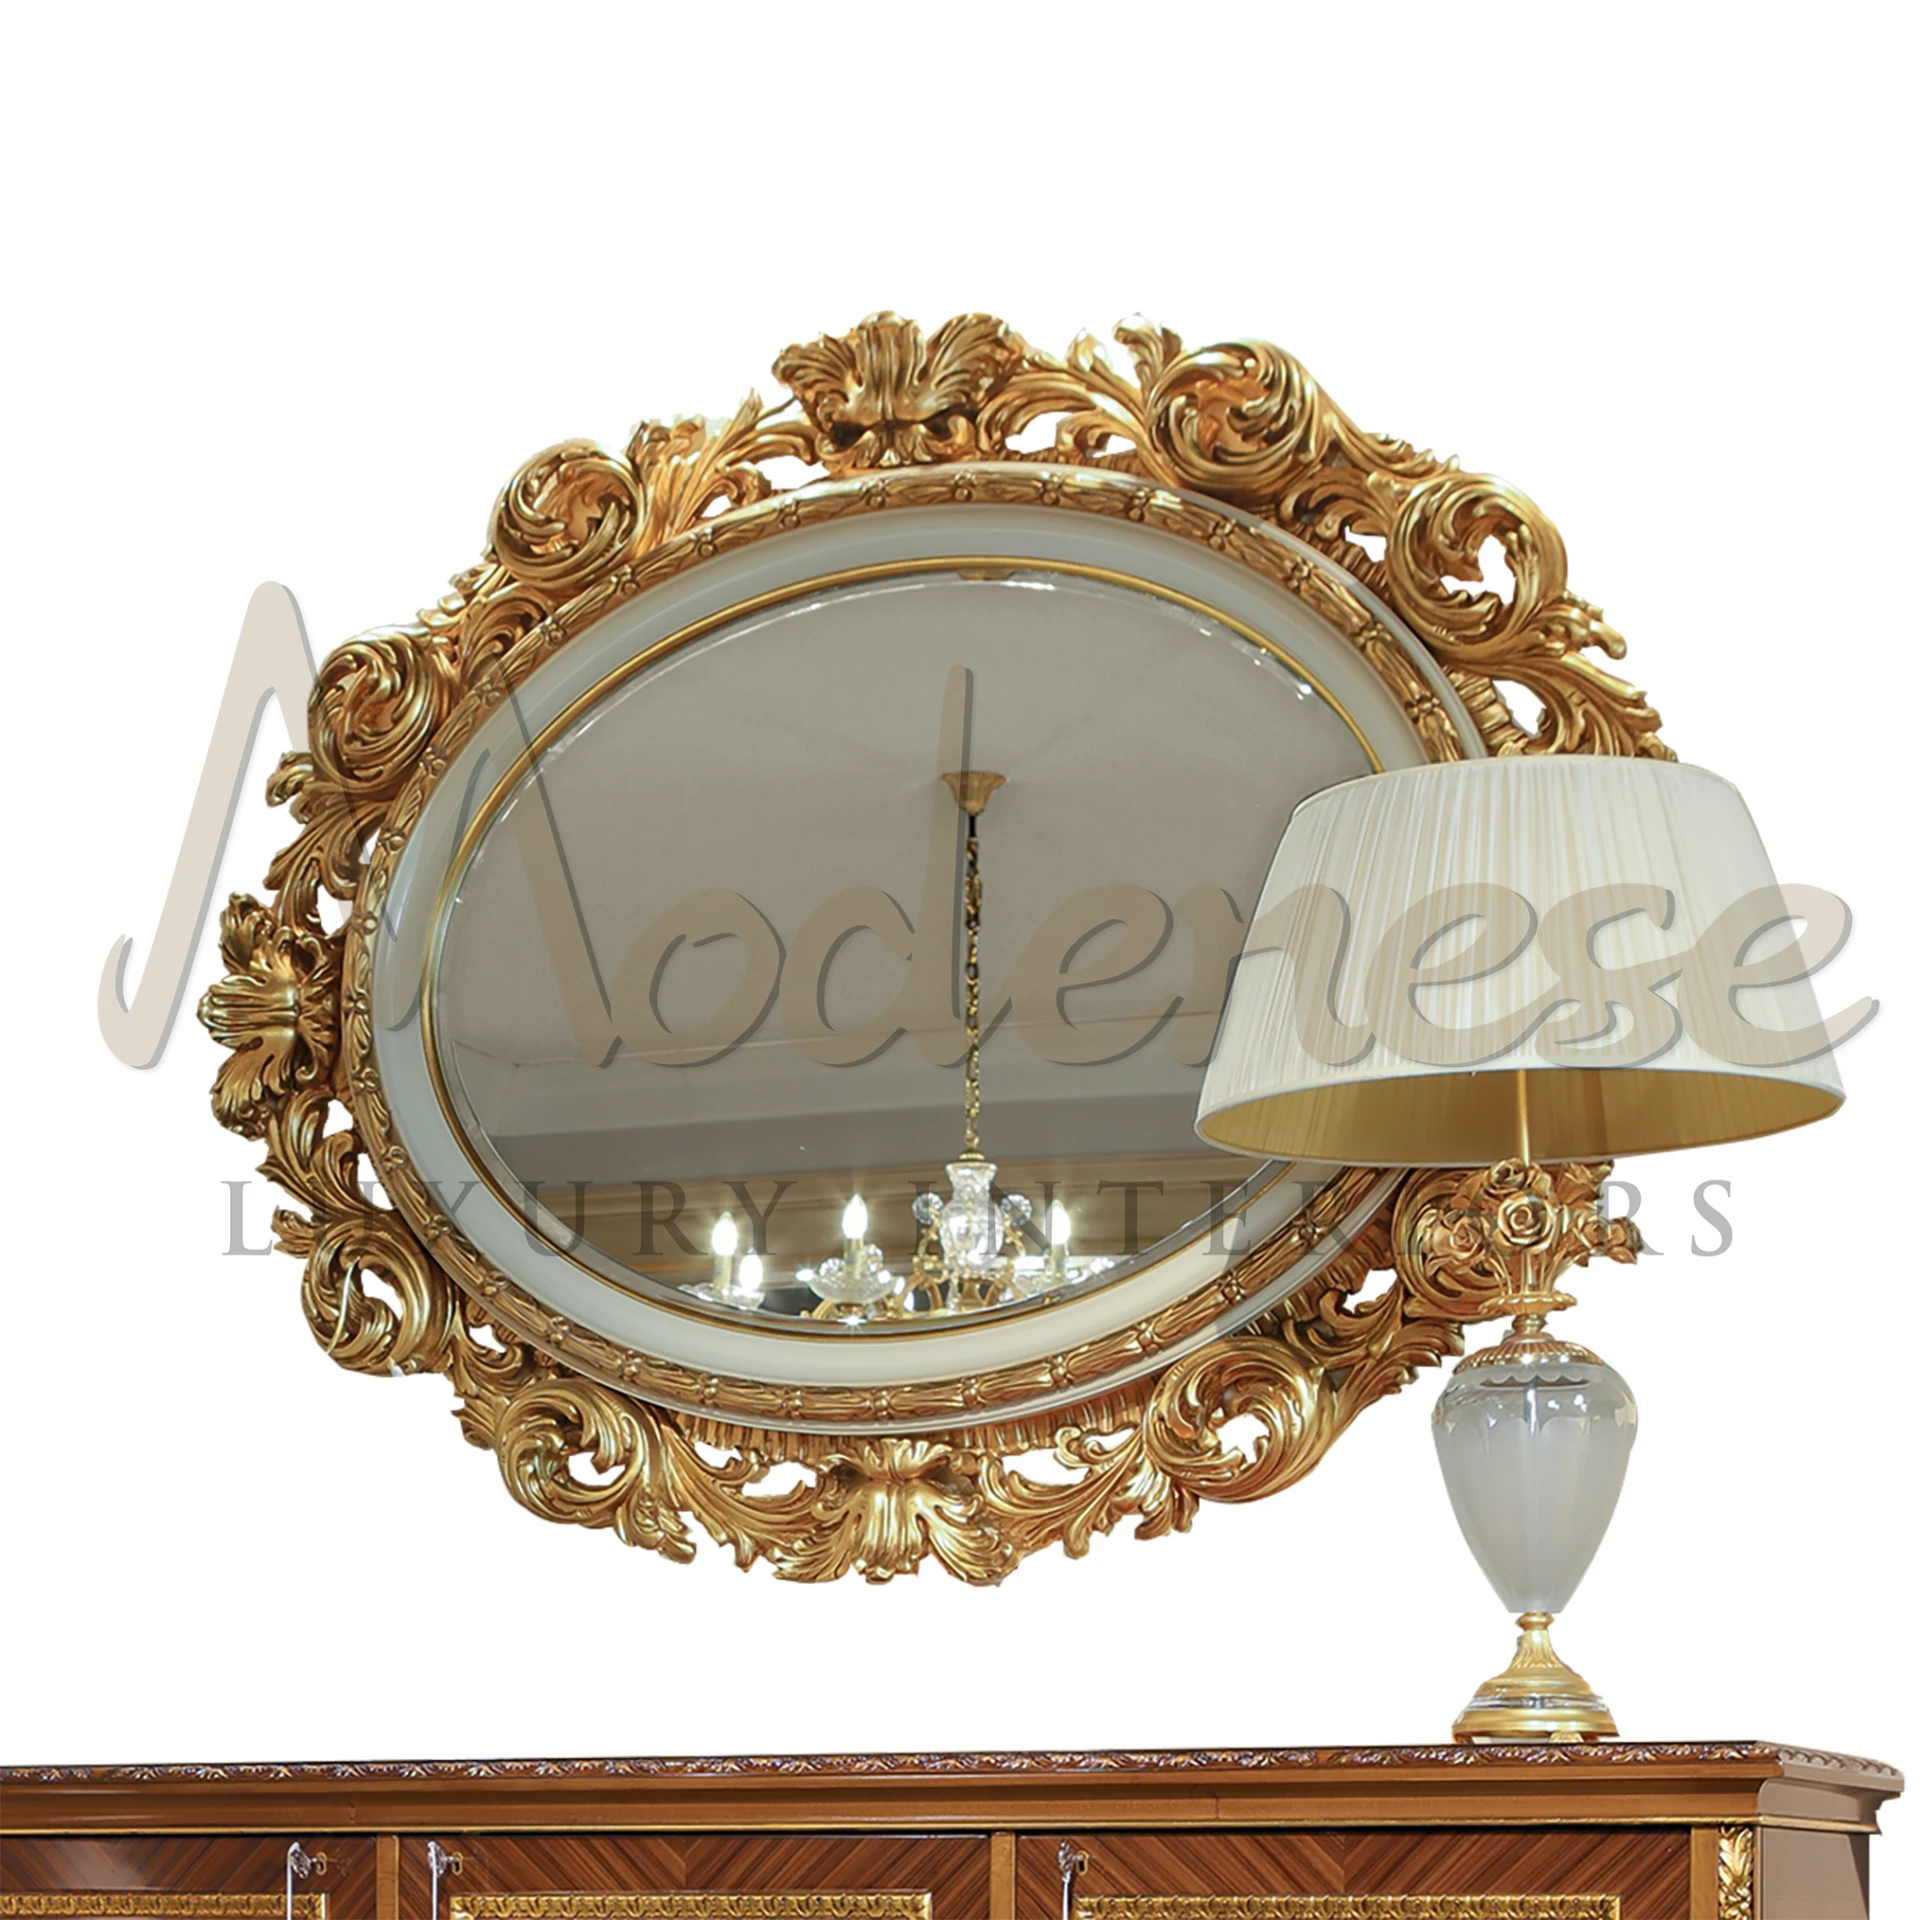 Hand Carved Classic Mirror, showcasing skilled artisan craftsmanship, ideal for adding elegance to luxury home decor.